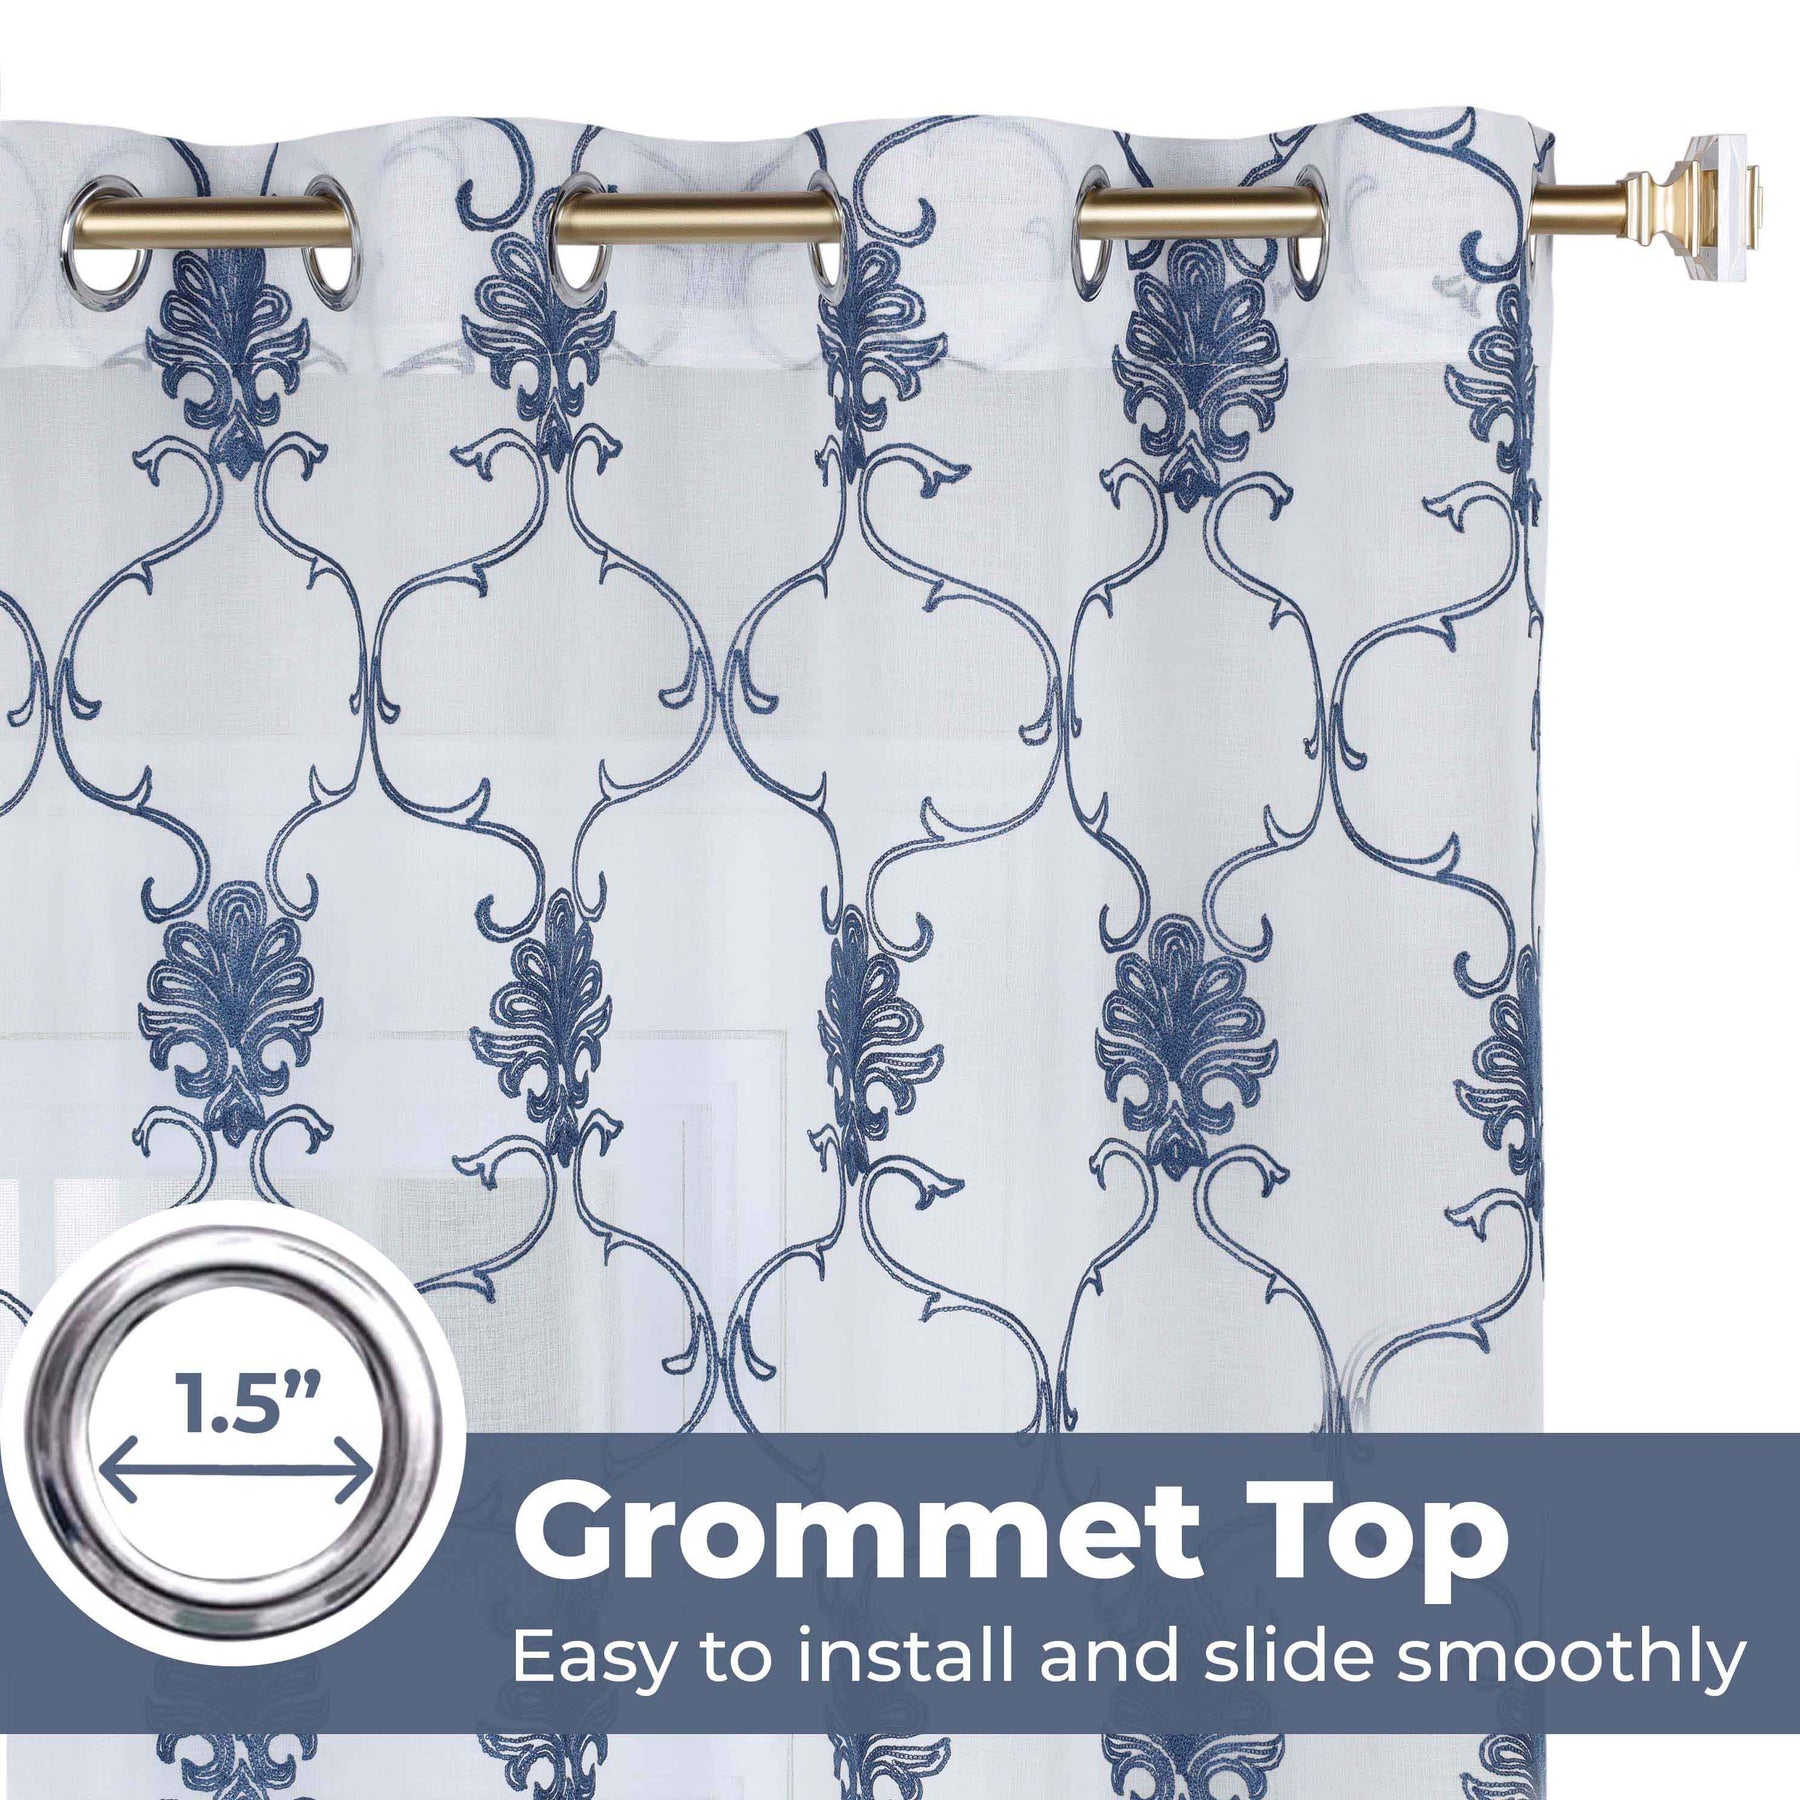 Embroidered Scroll Grommet 2-Piece Sheer Curtain Panel Set - Blue